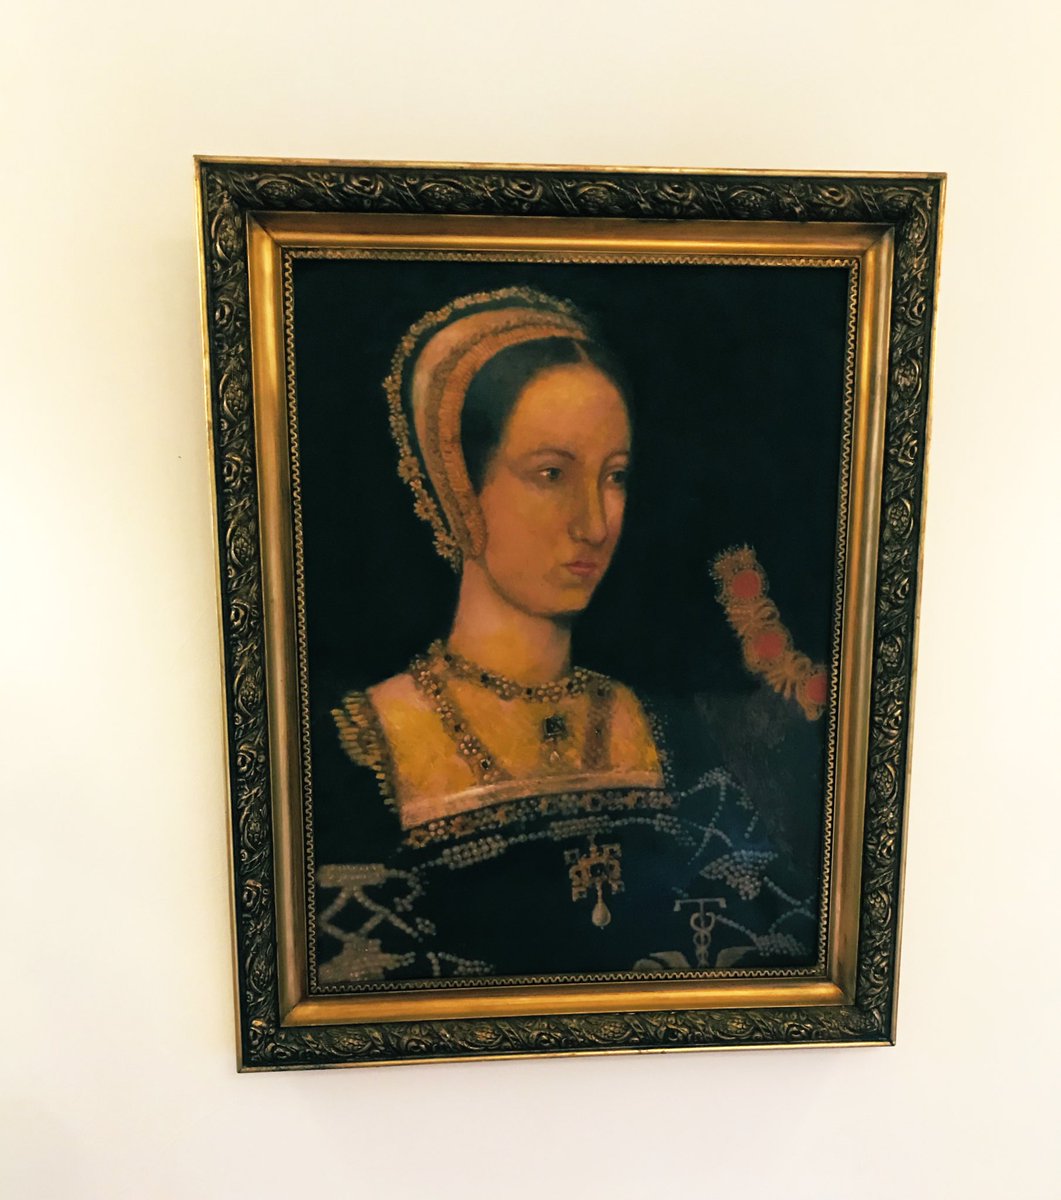 Portraits to delight any #Tudor-loving heart ♥️ 

Taken by yours truly at Thornbury Castle, Gloucestershire during my visit today 😍

#AnneBoleyn #HenryVIII #SummerProgress 👑